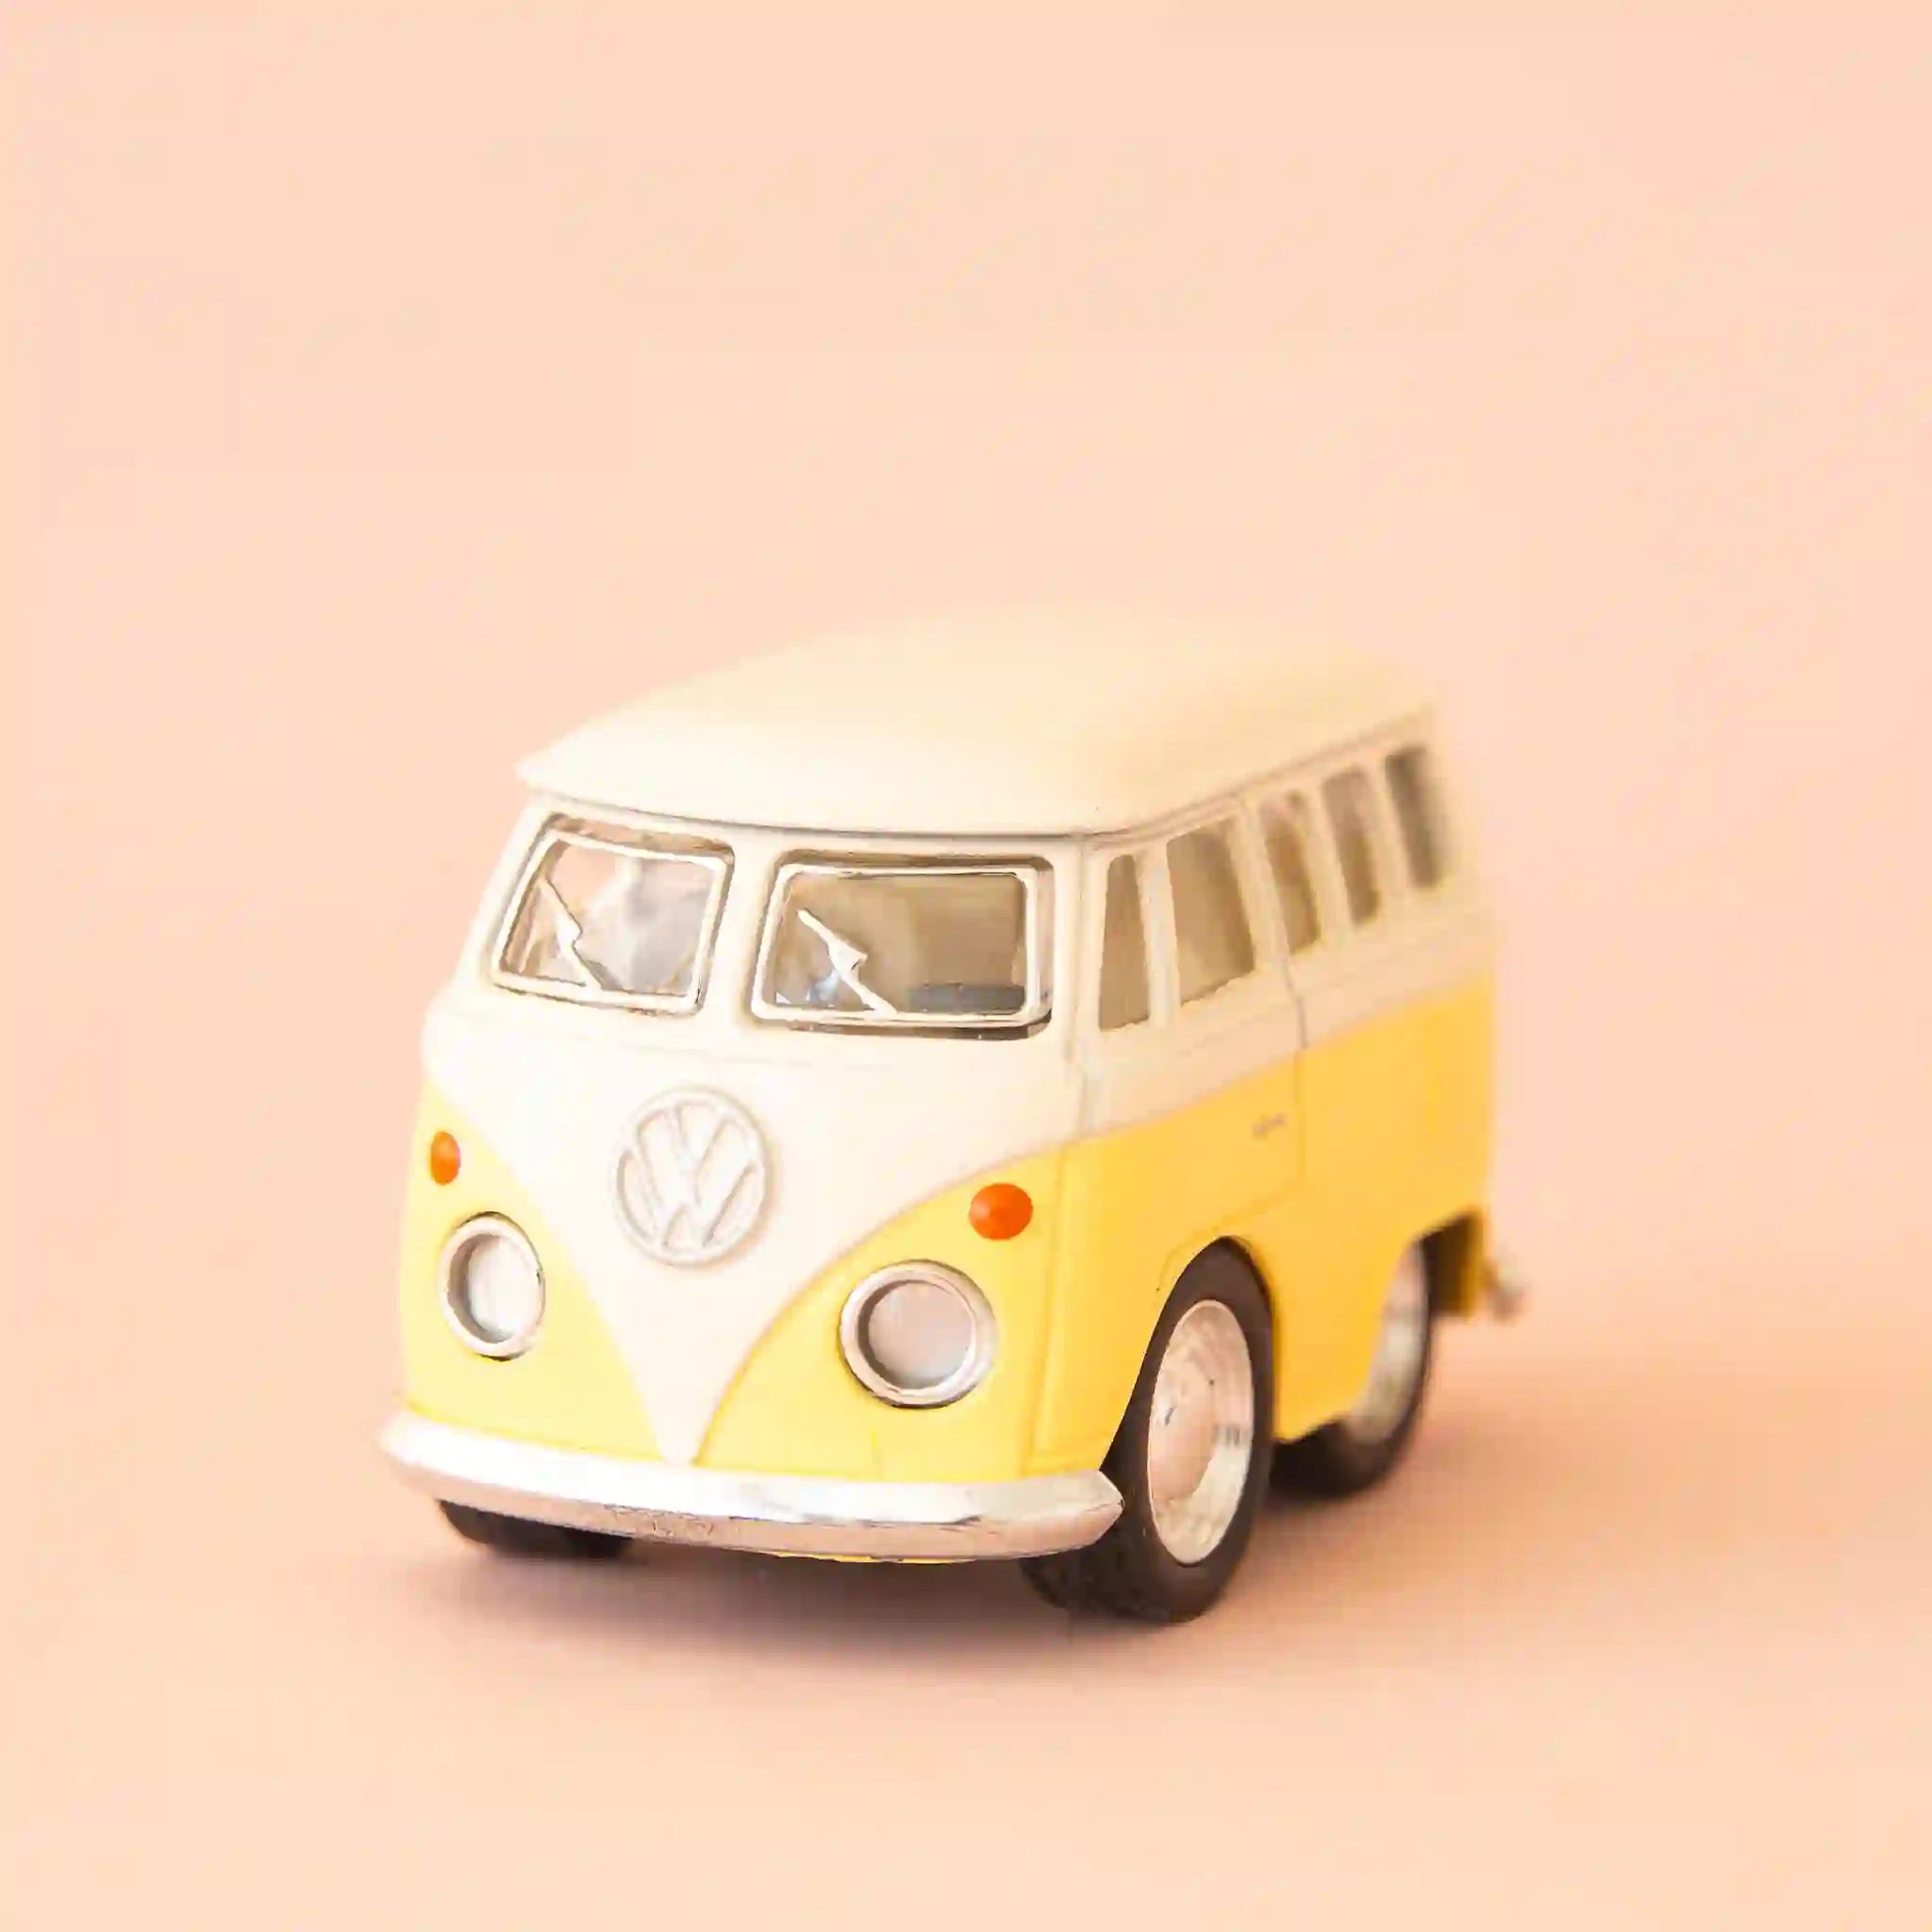 On a peach background is a yellow VW bus toy. 